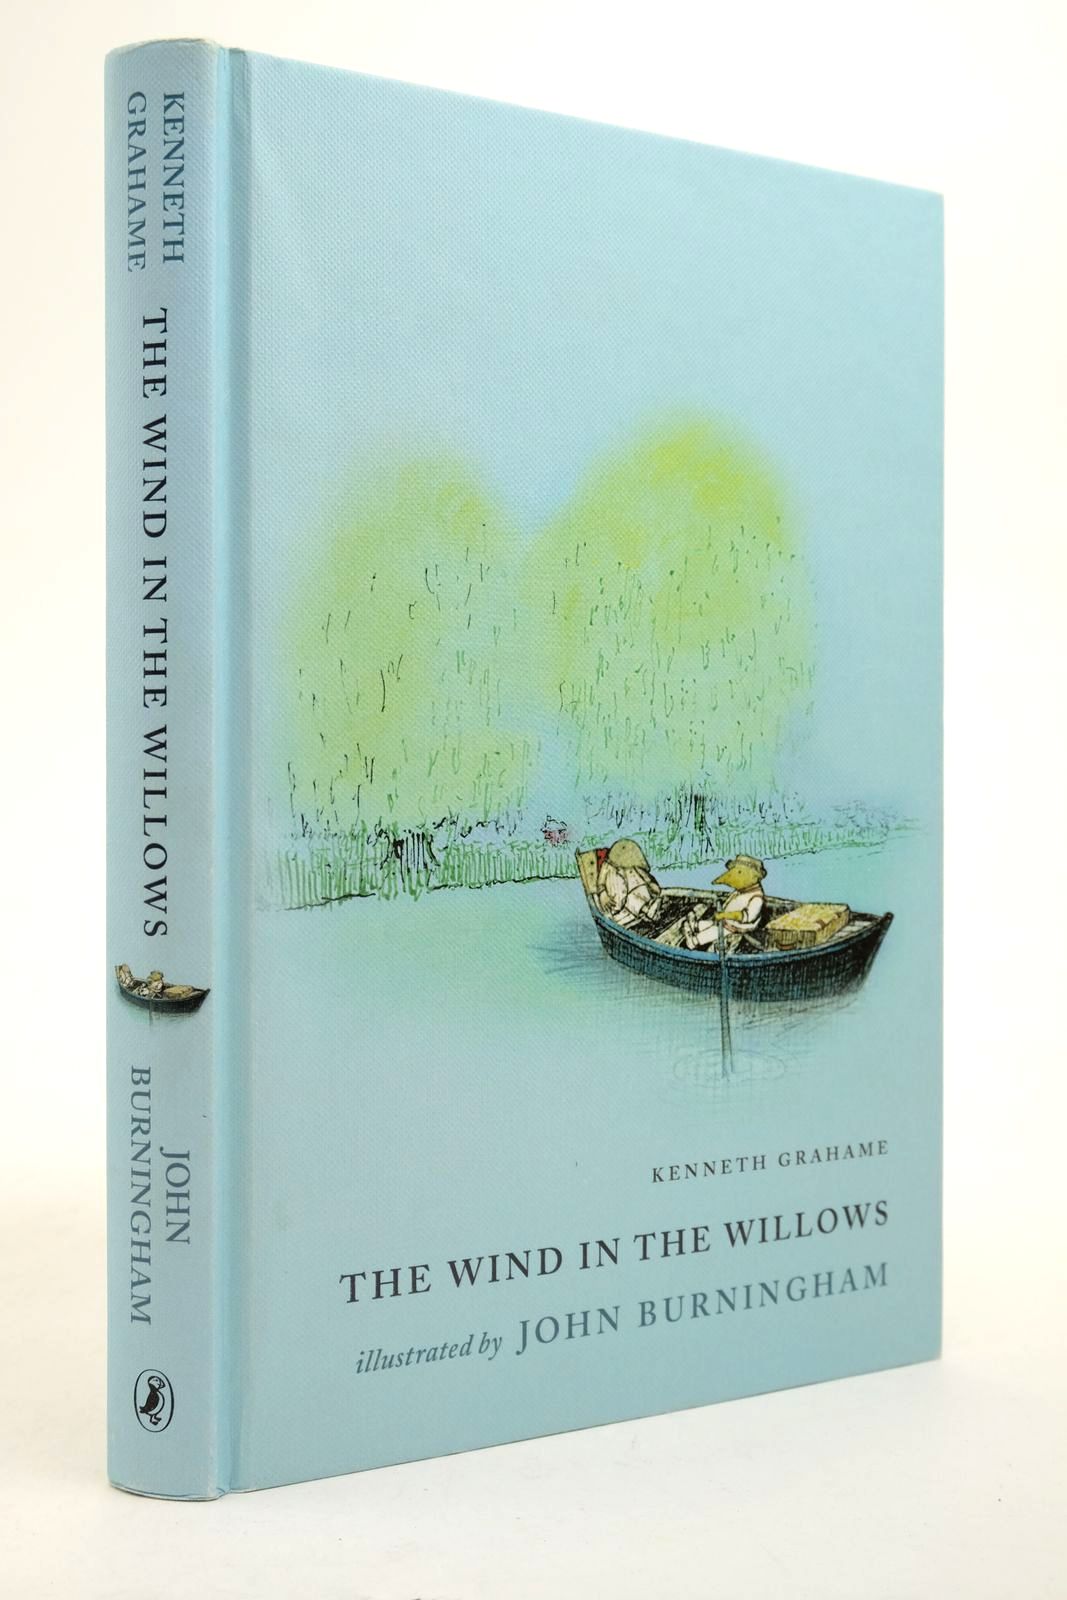 Photo of THE WIND IN THE WILLOWS written by Grahame, Kenneth illustrated by Burningham, John published by Puffin Books (STOCK CODE: 2140316)  for sale by Stella & Rose's Books